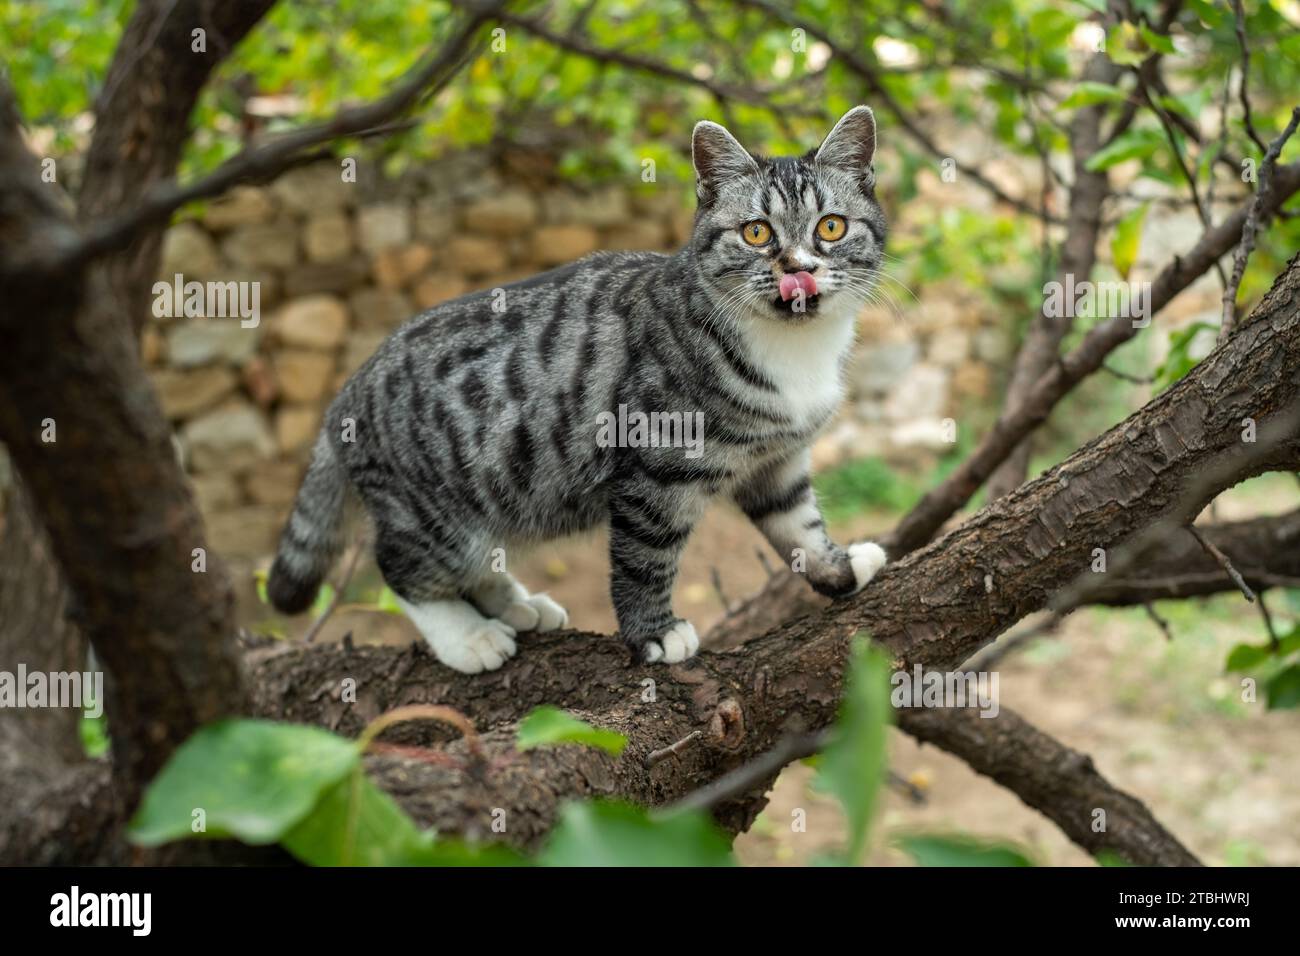 Cat sticking out tongue on a tree. Stock Photo